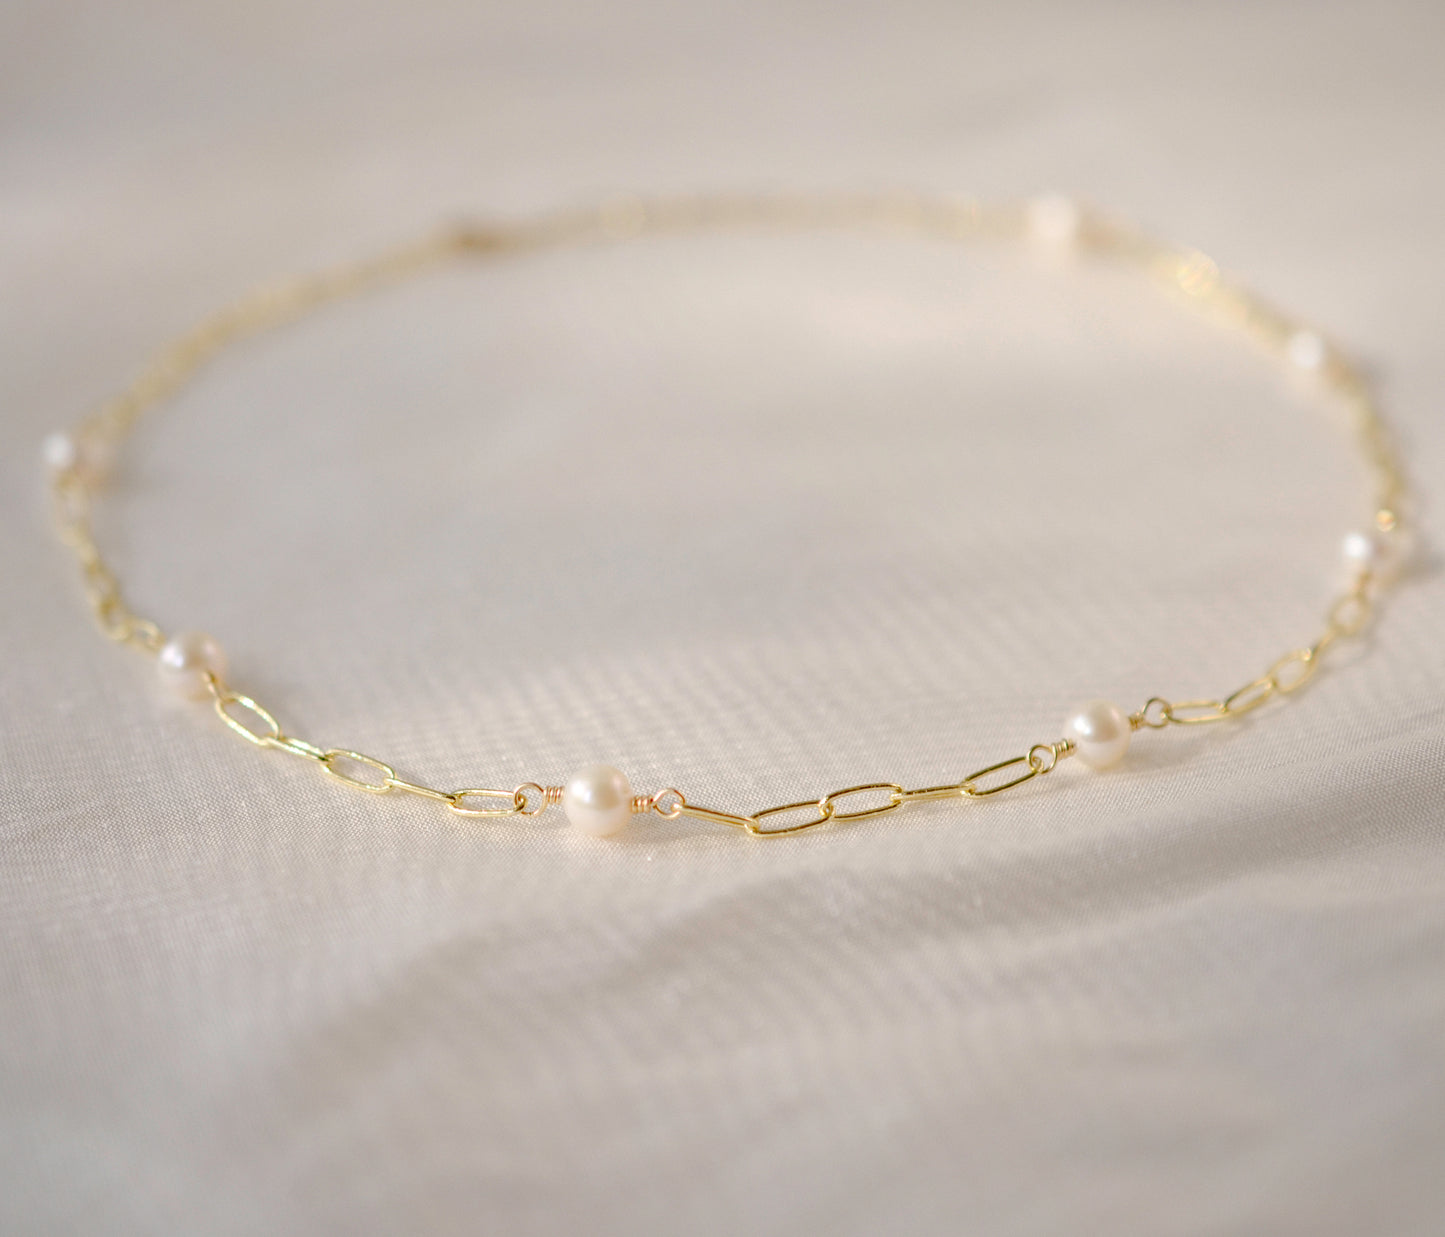 White freshwater pearls set onto a gold paperclip style chain.